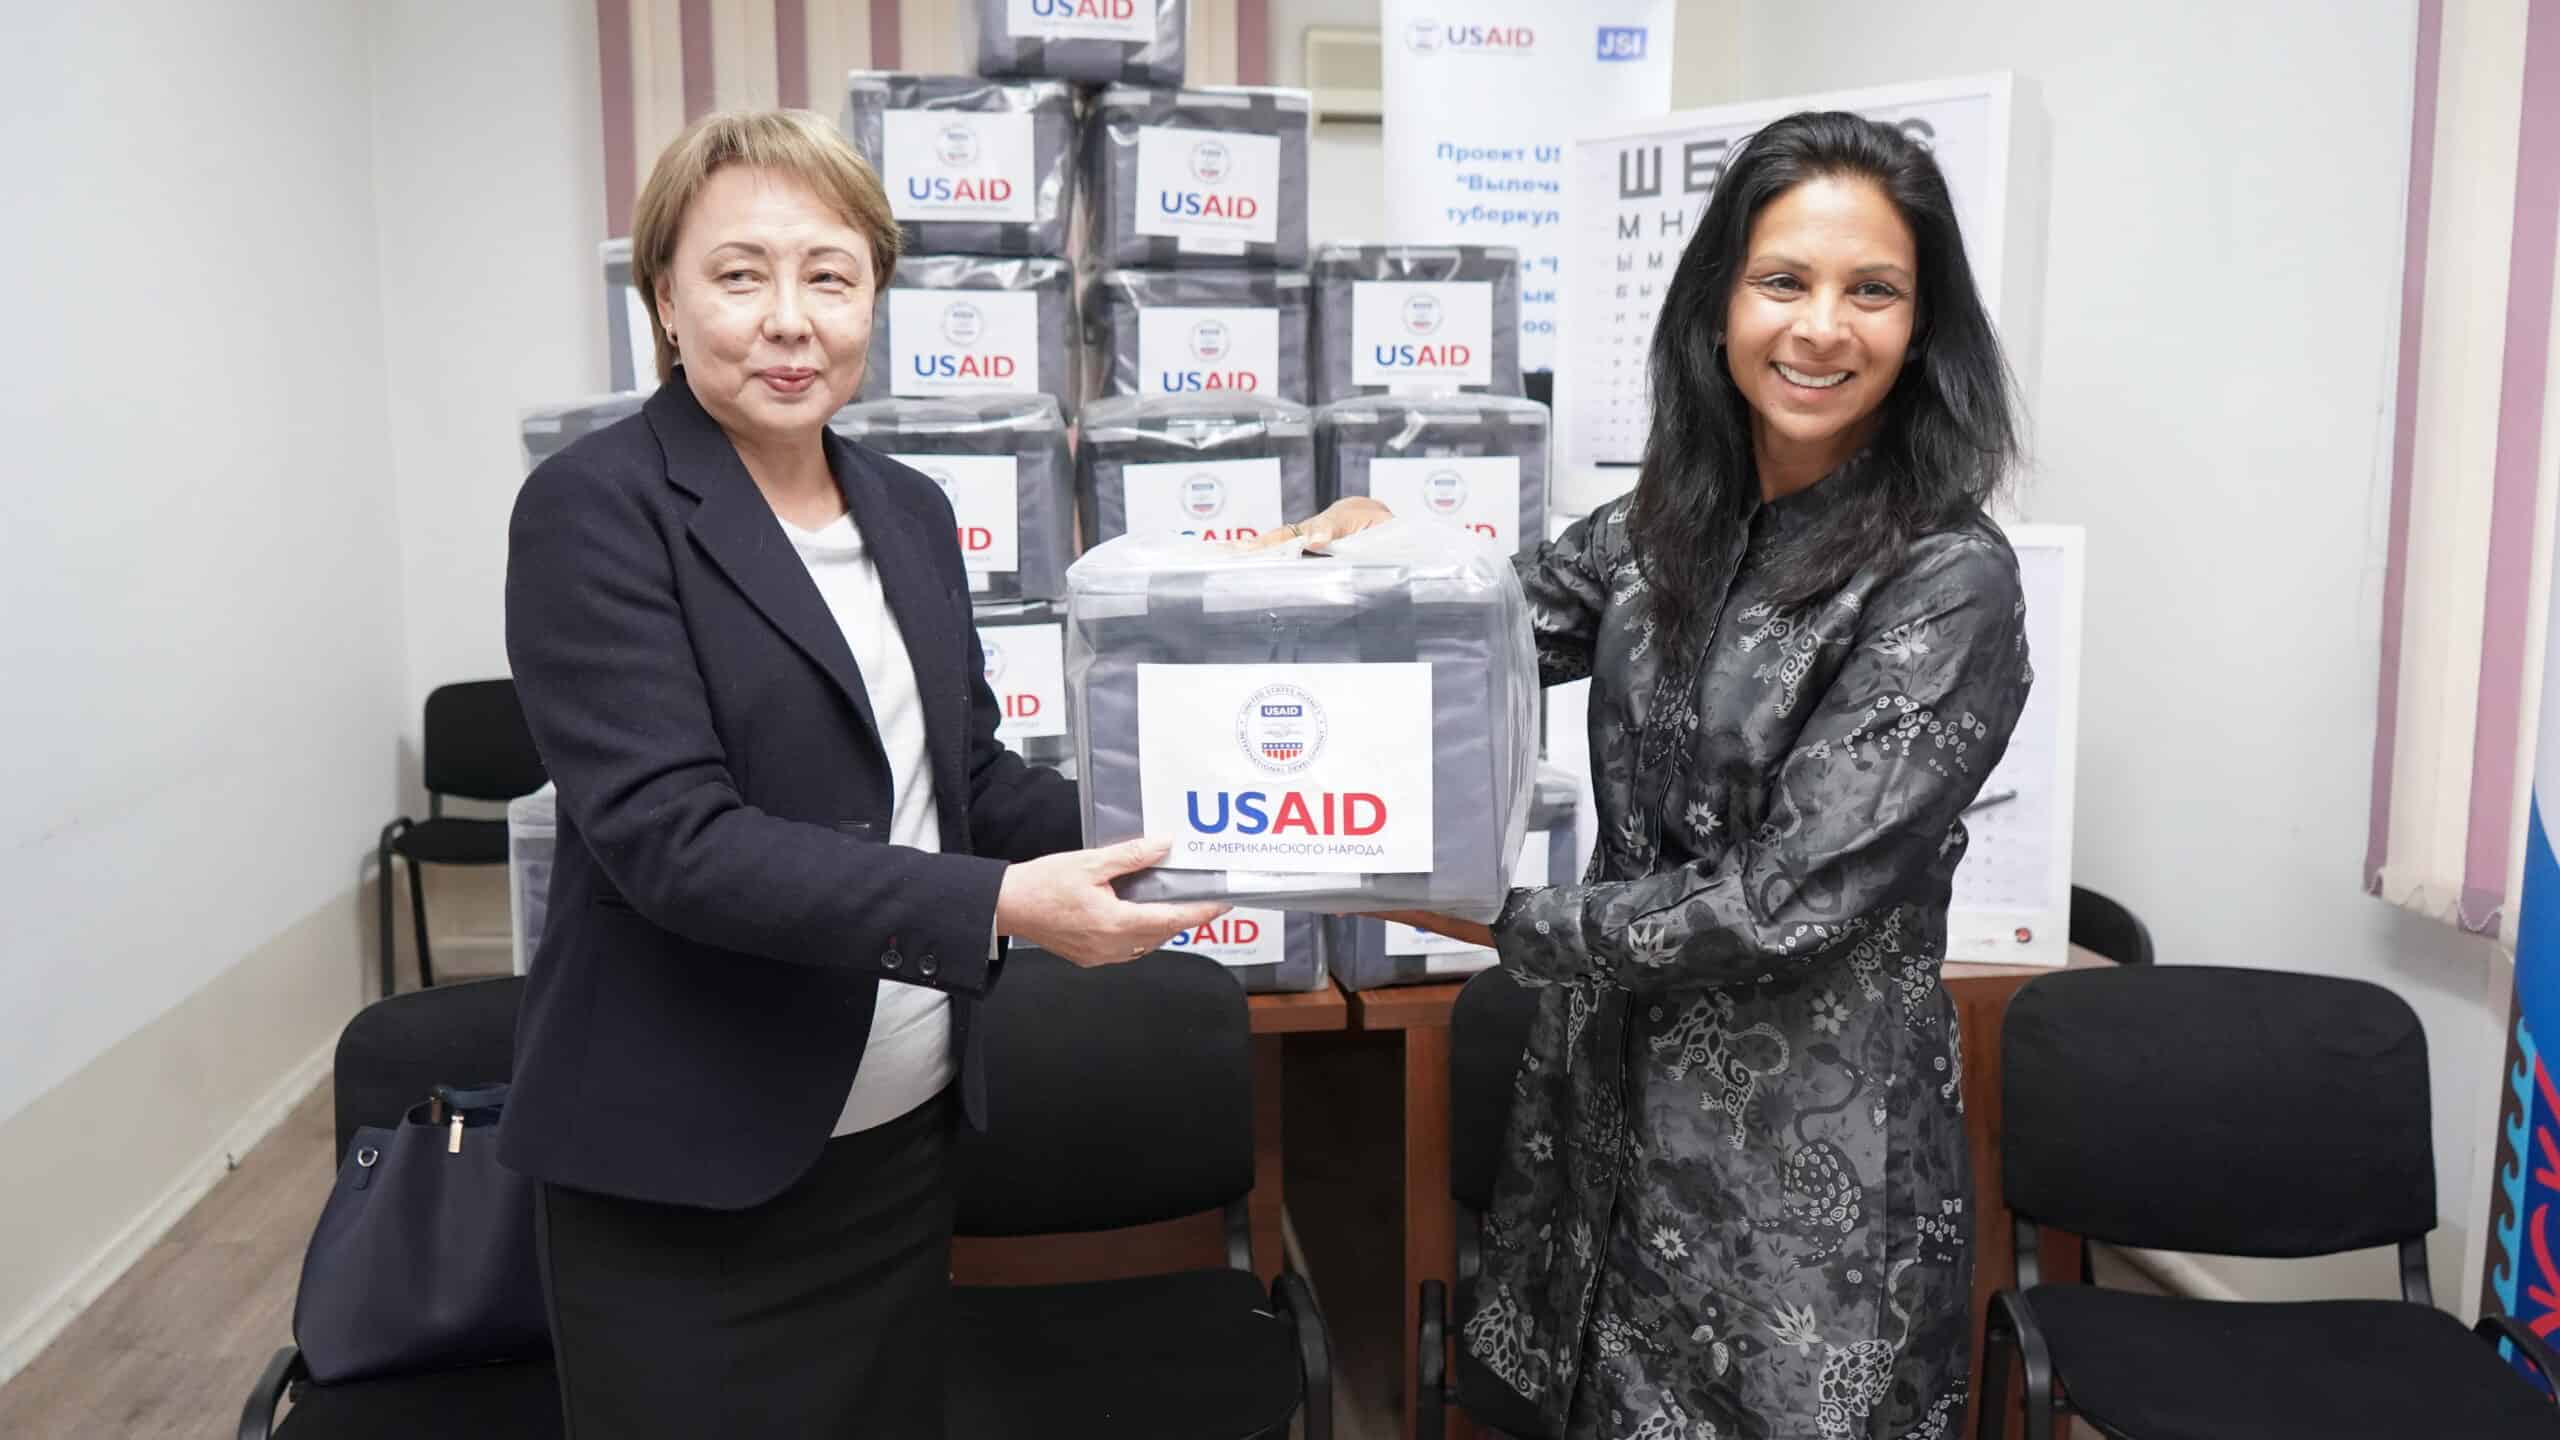 Primary Health Clinics Receive Medical Equipment to Improve TB care in the Kyrgyz Republic